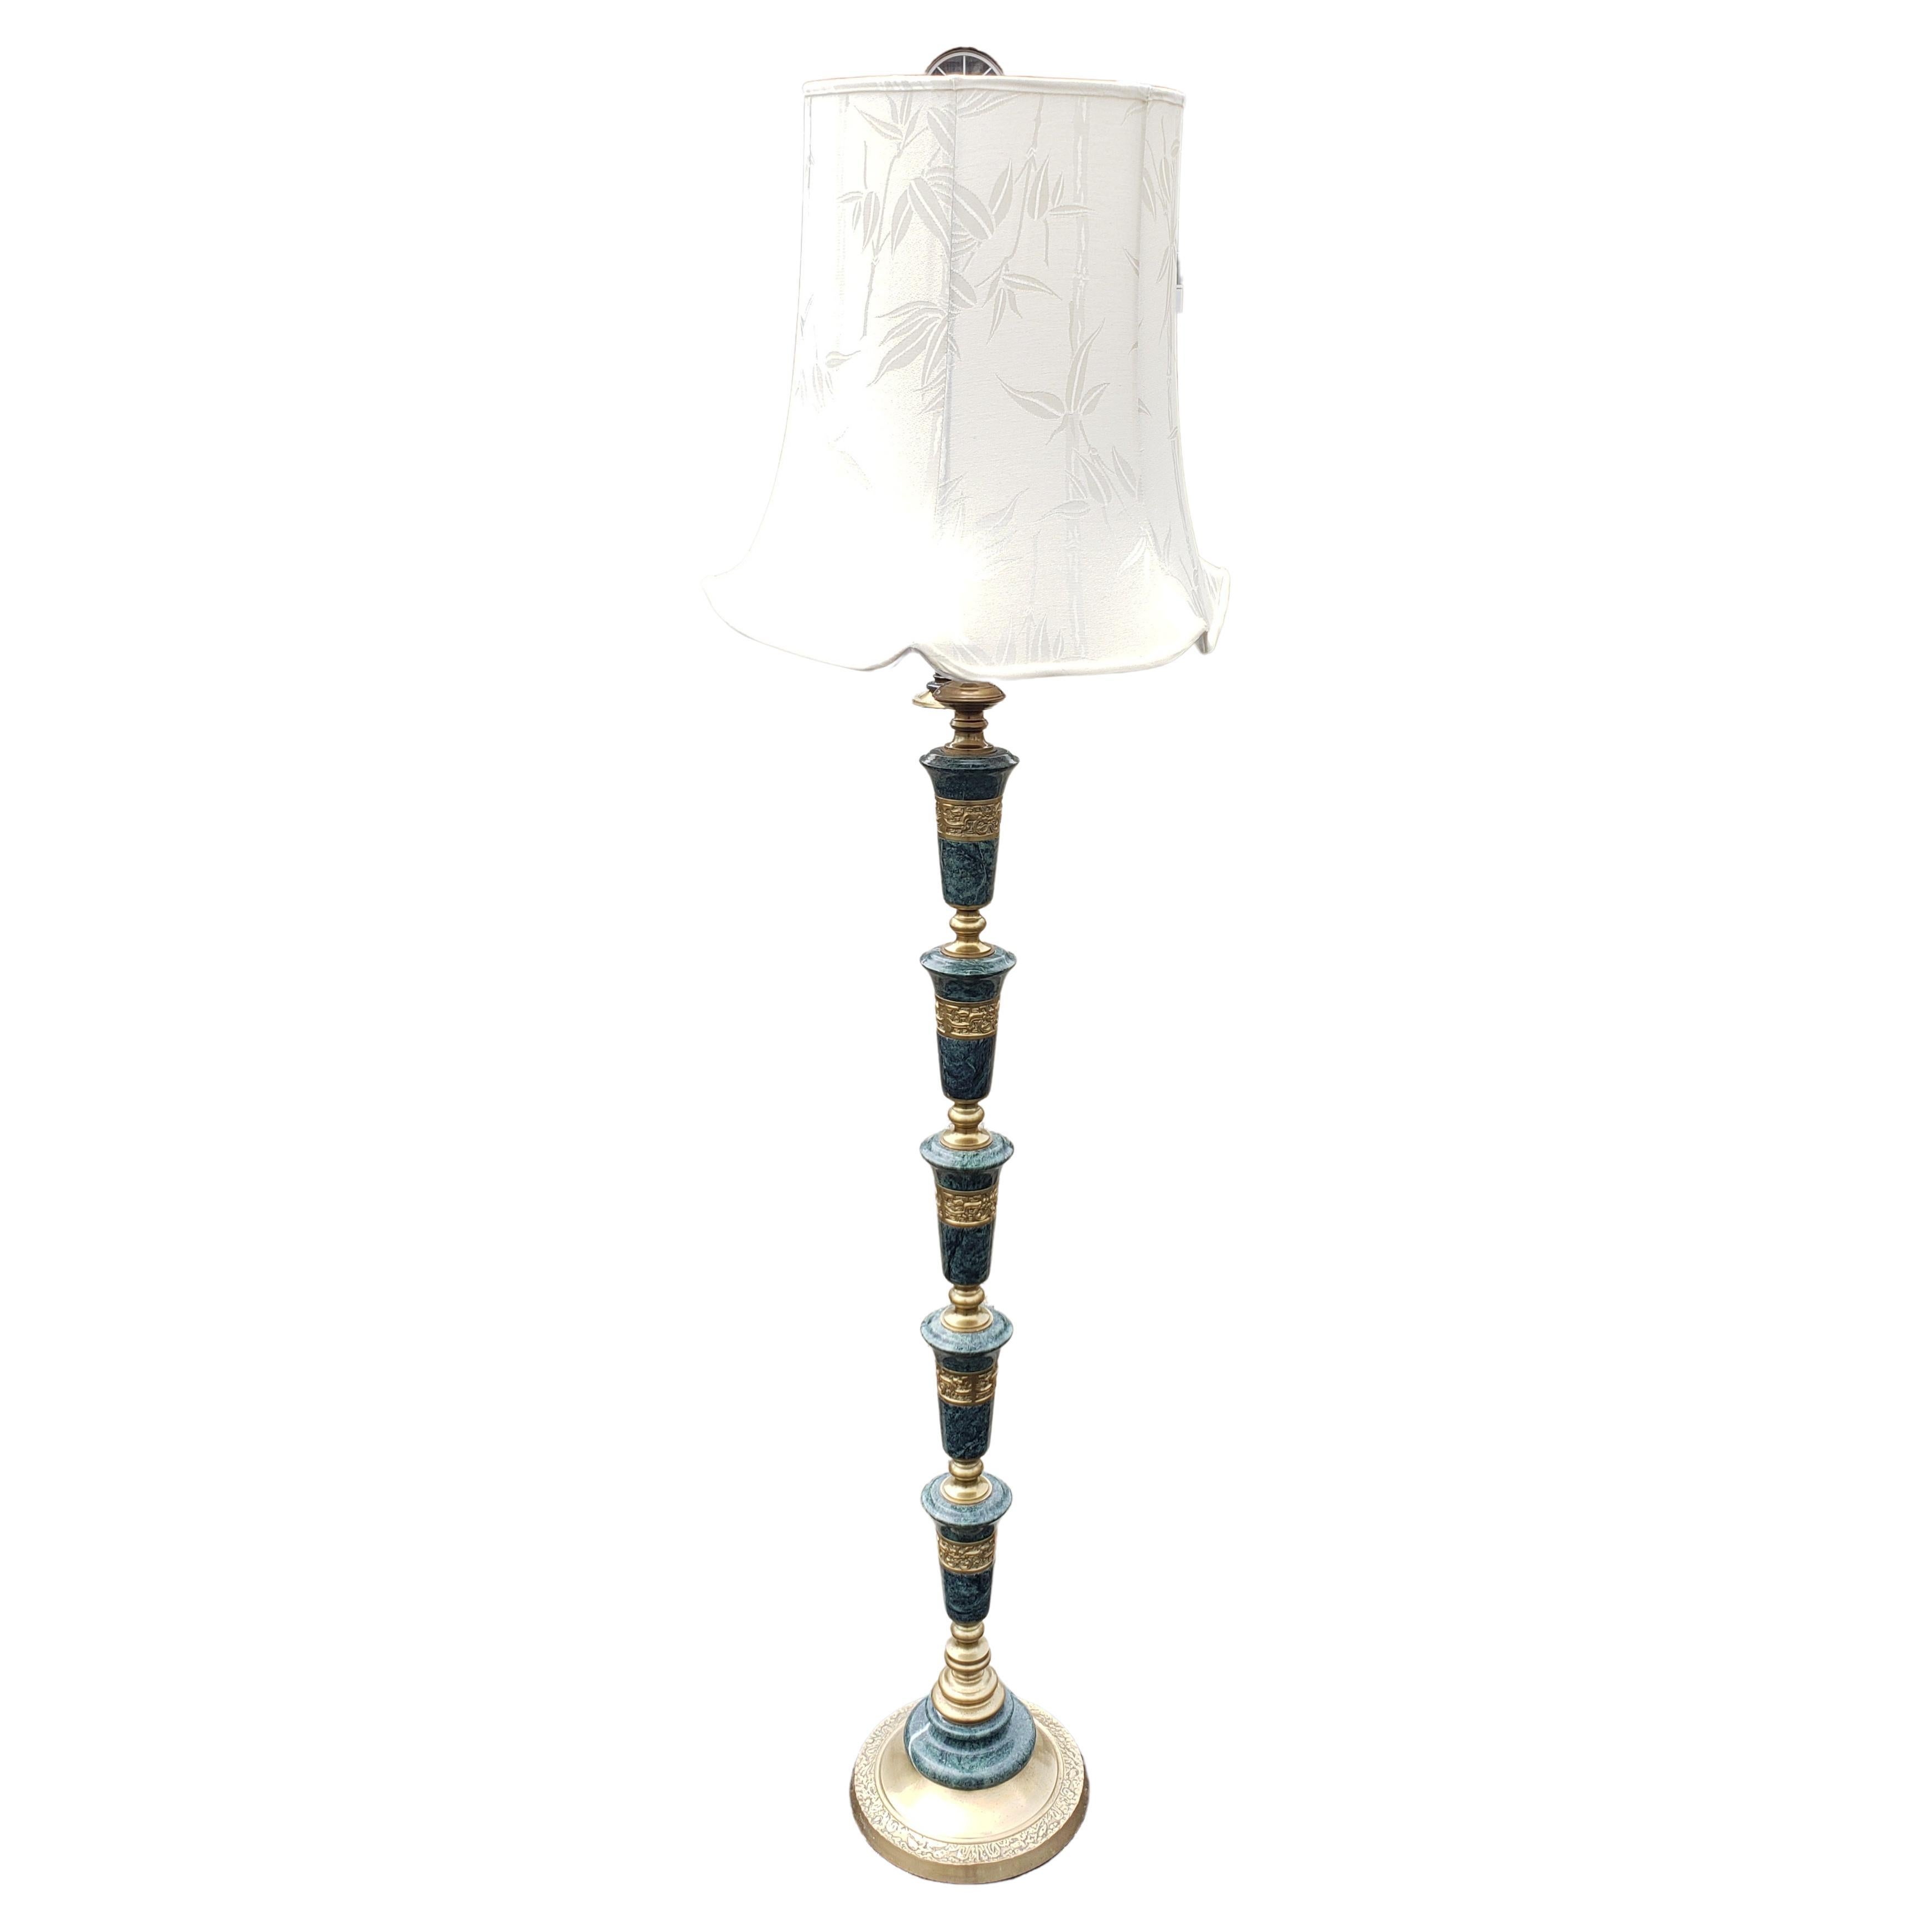 Mid-century Frederick Cooper Asian Regency marble and brass floor lamp. Green marble with a Asian motif throughout the brass. Original harps that is 9.75in height.
Very heavy lamps, about 21lbs.
Measures: 10